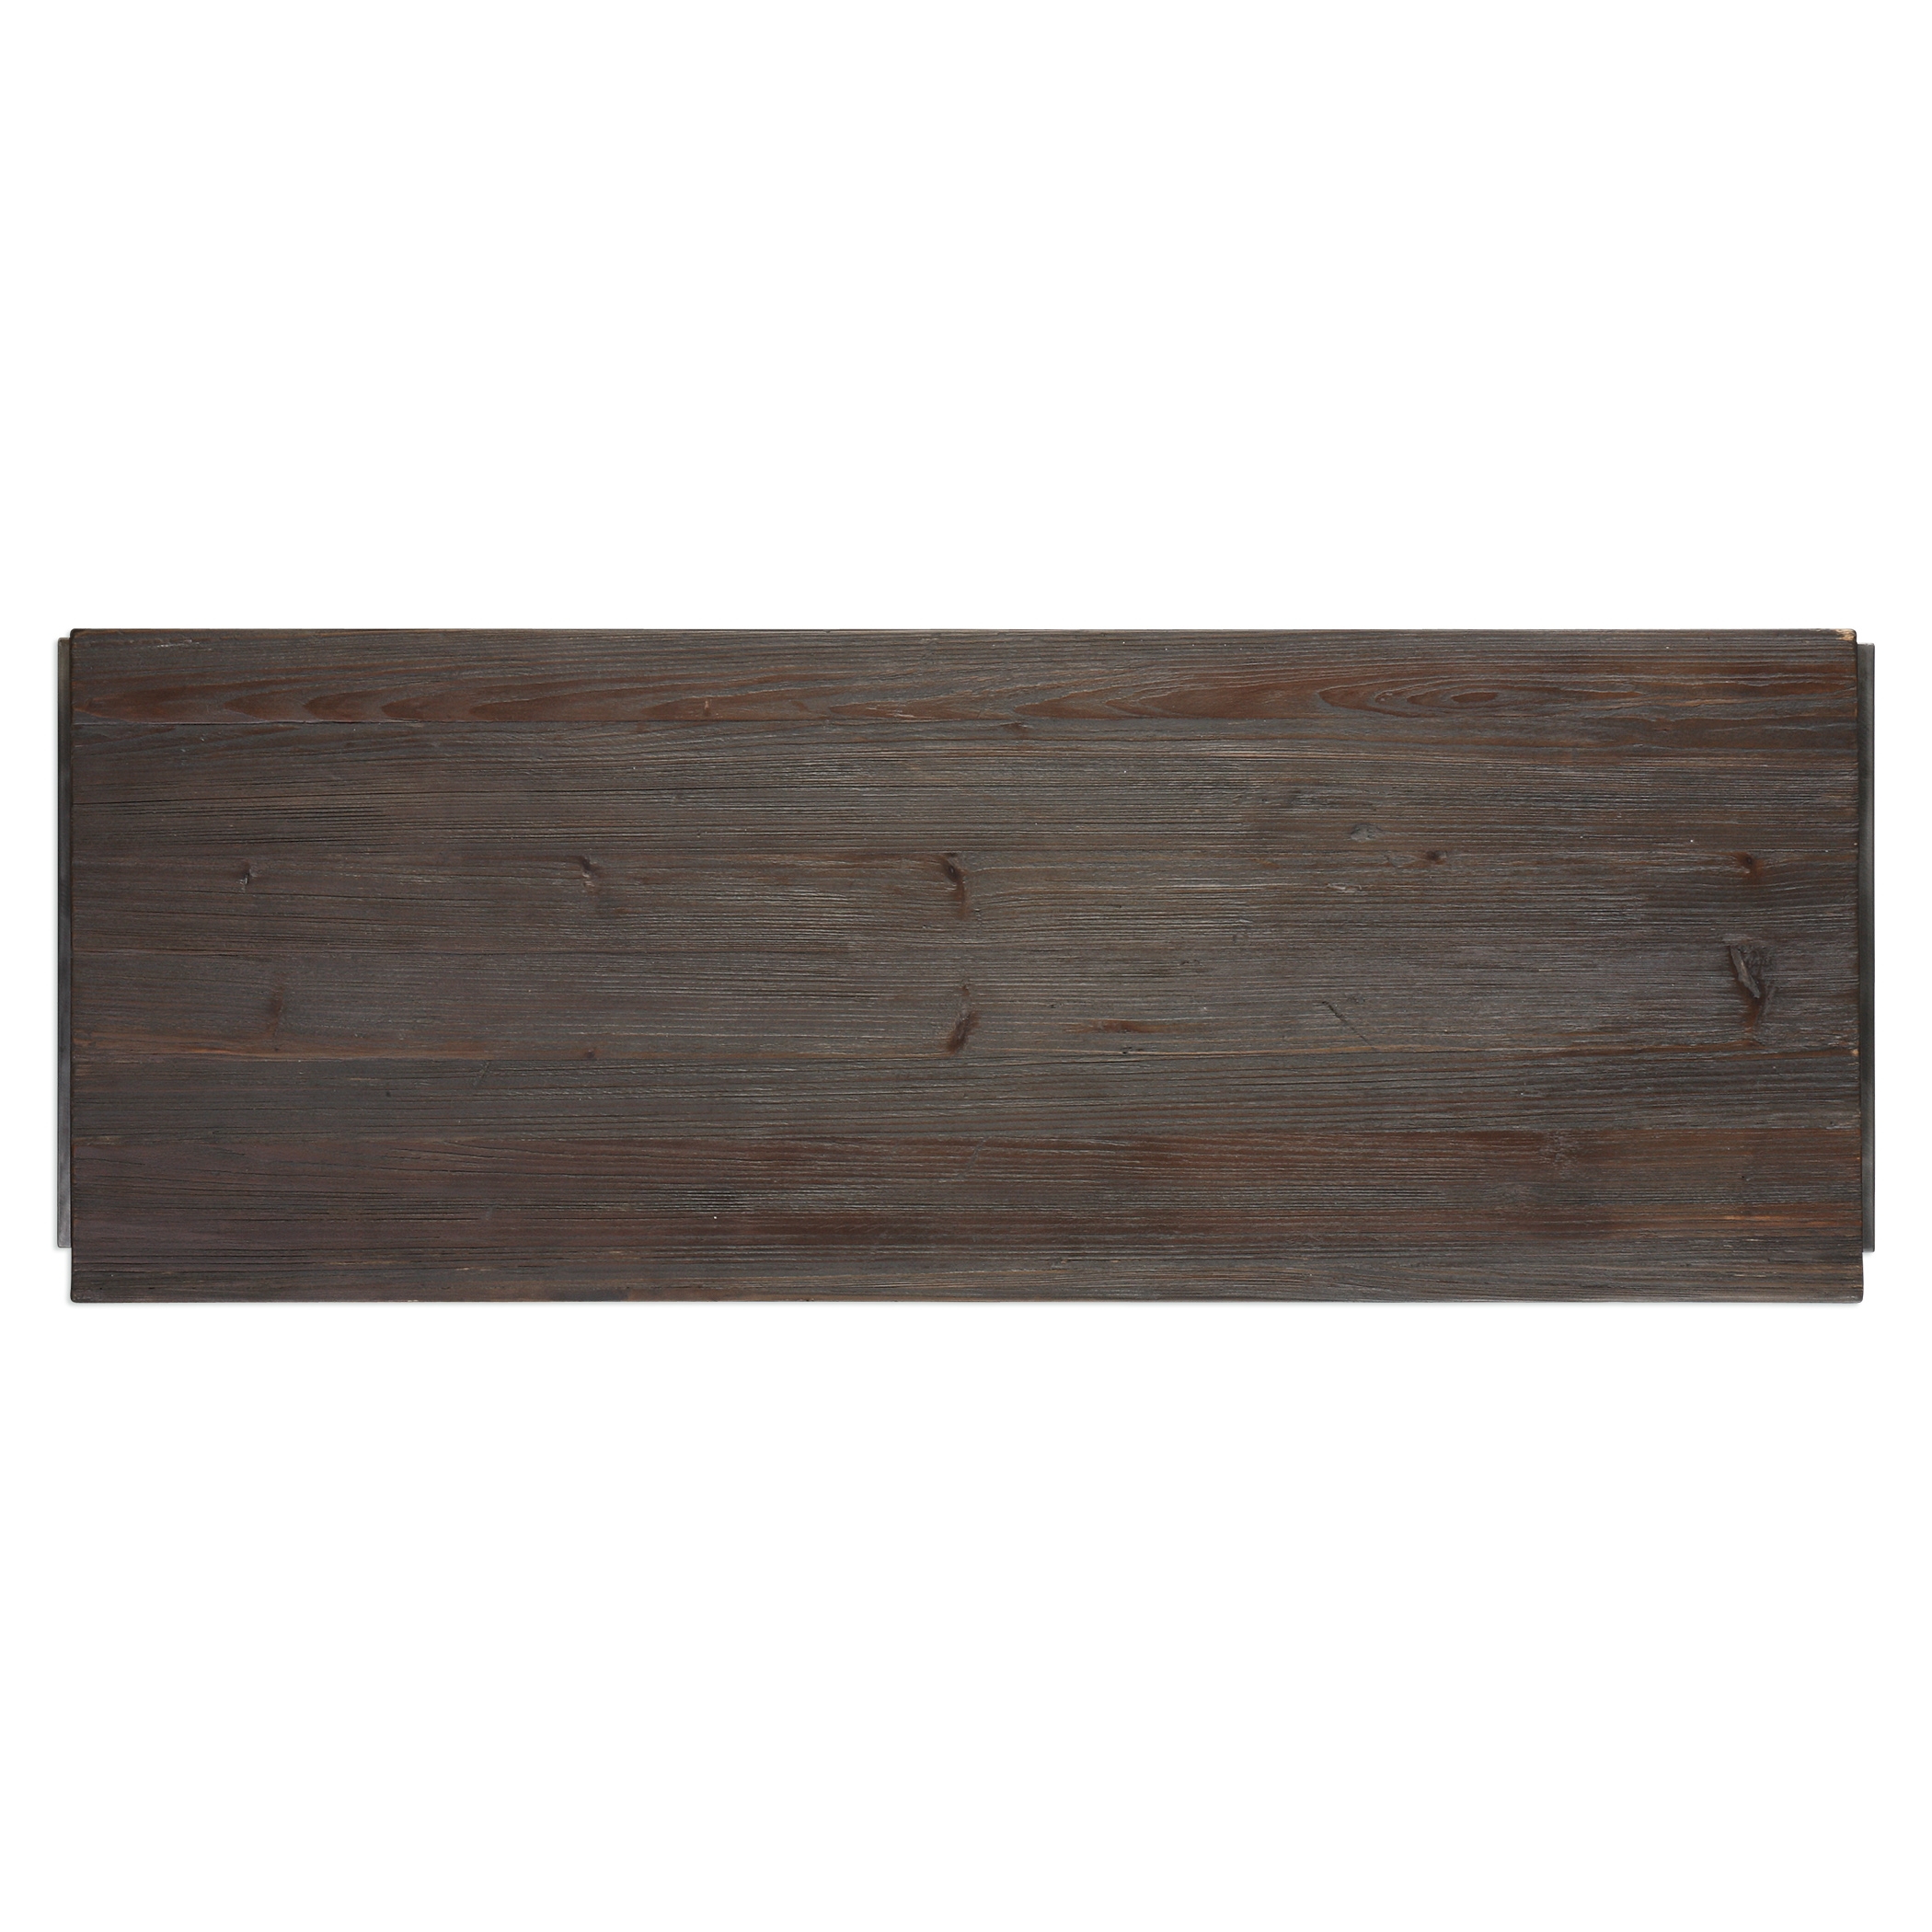 Morrigan Industrial Console Table - Image 2